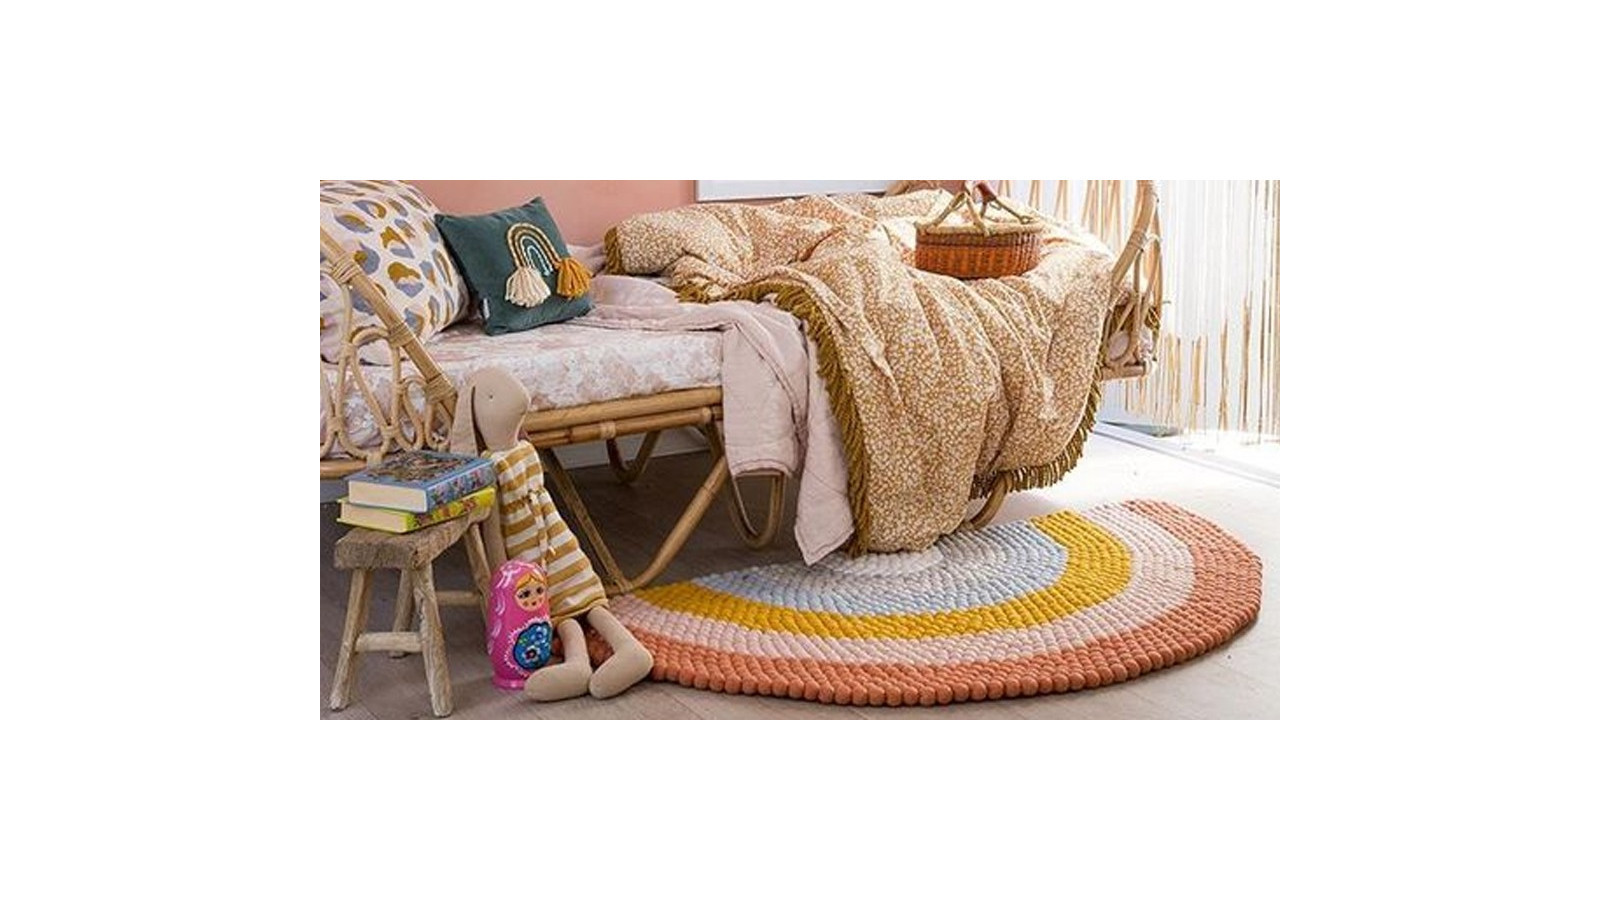 How to choose a rug for a girl's bedroom?